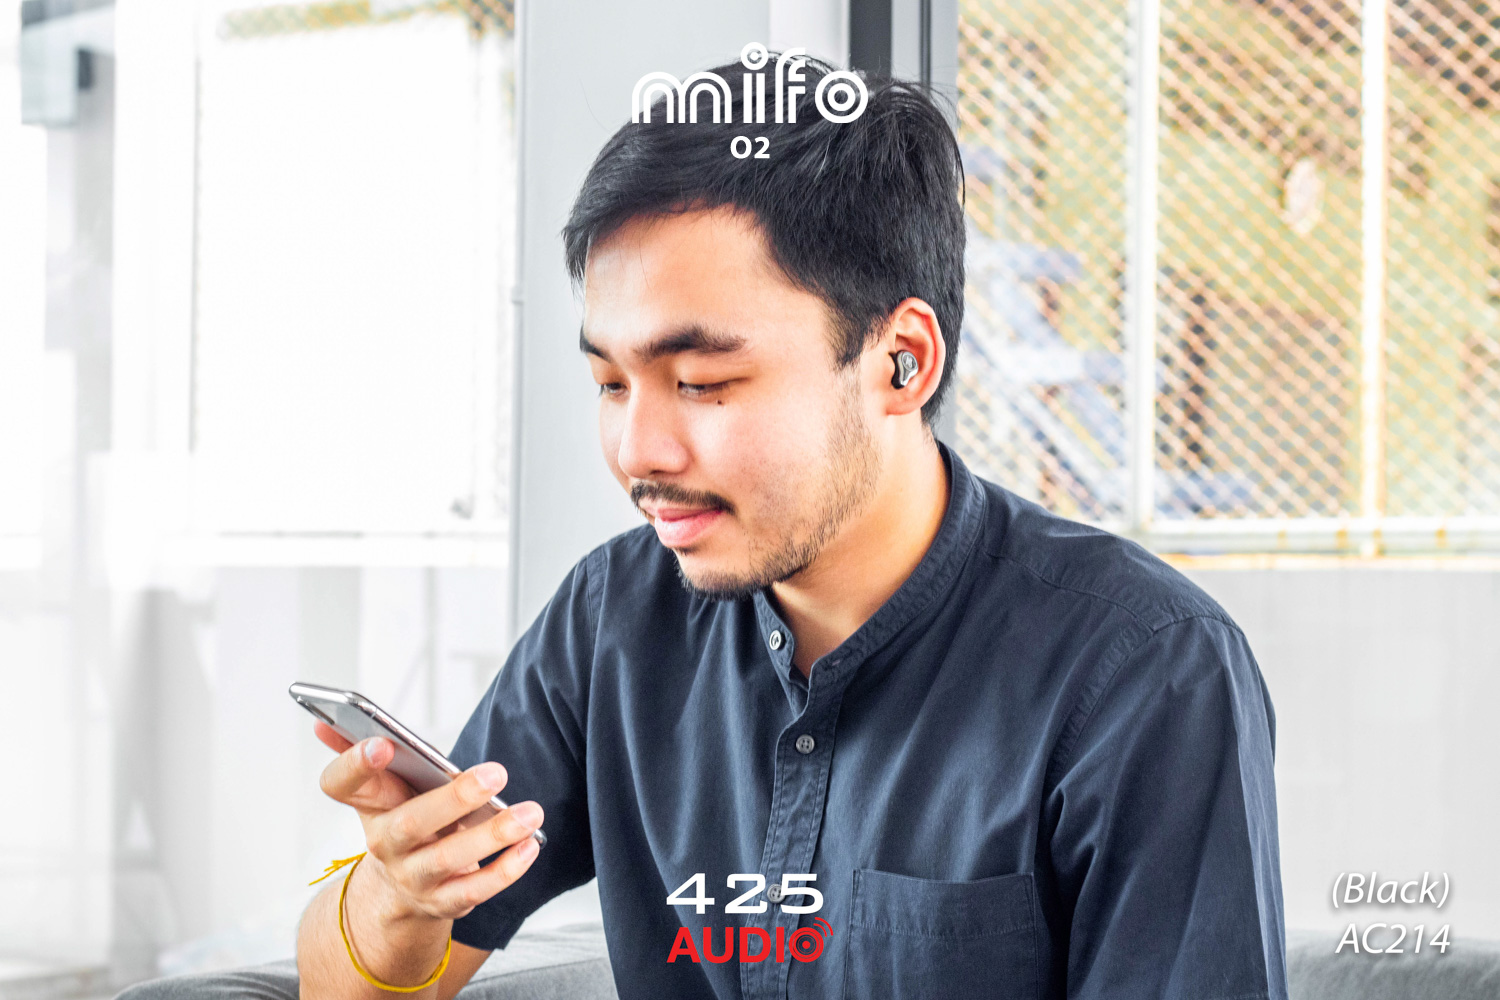 mifo,o2,true,wireless,light,weight,ipx5,sports,long,playback,earbud,comfortable,ios,android,cheap